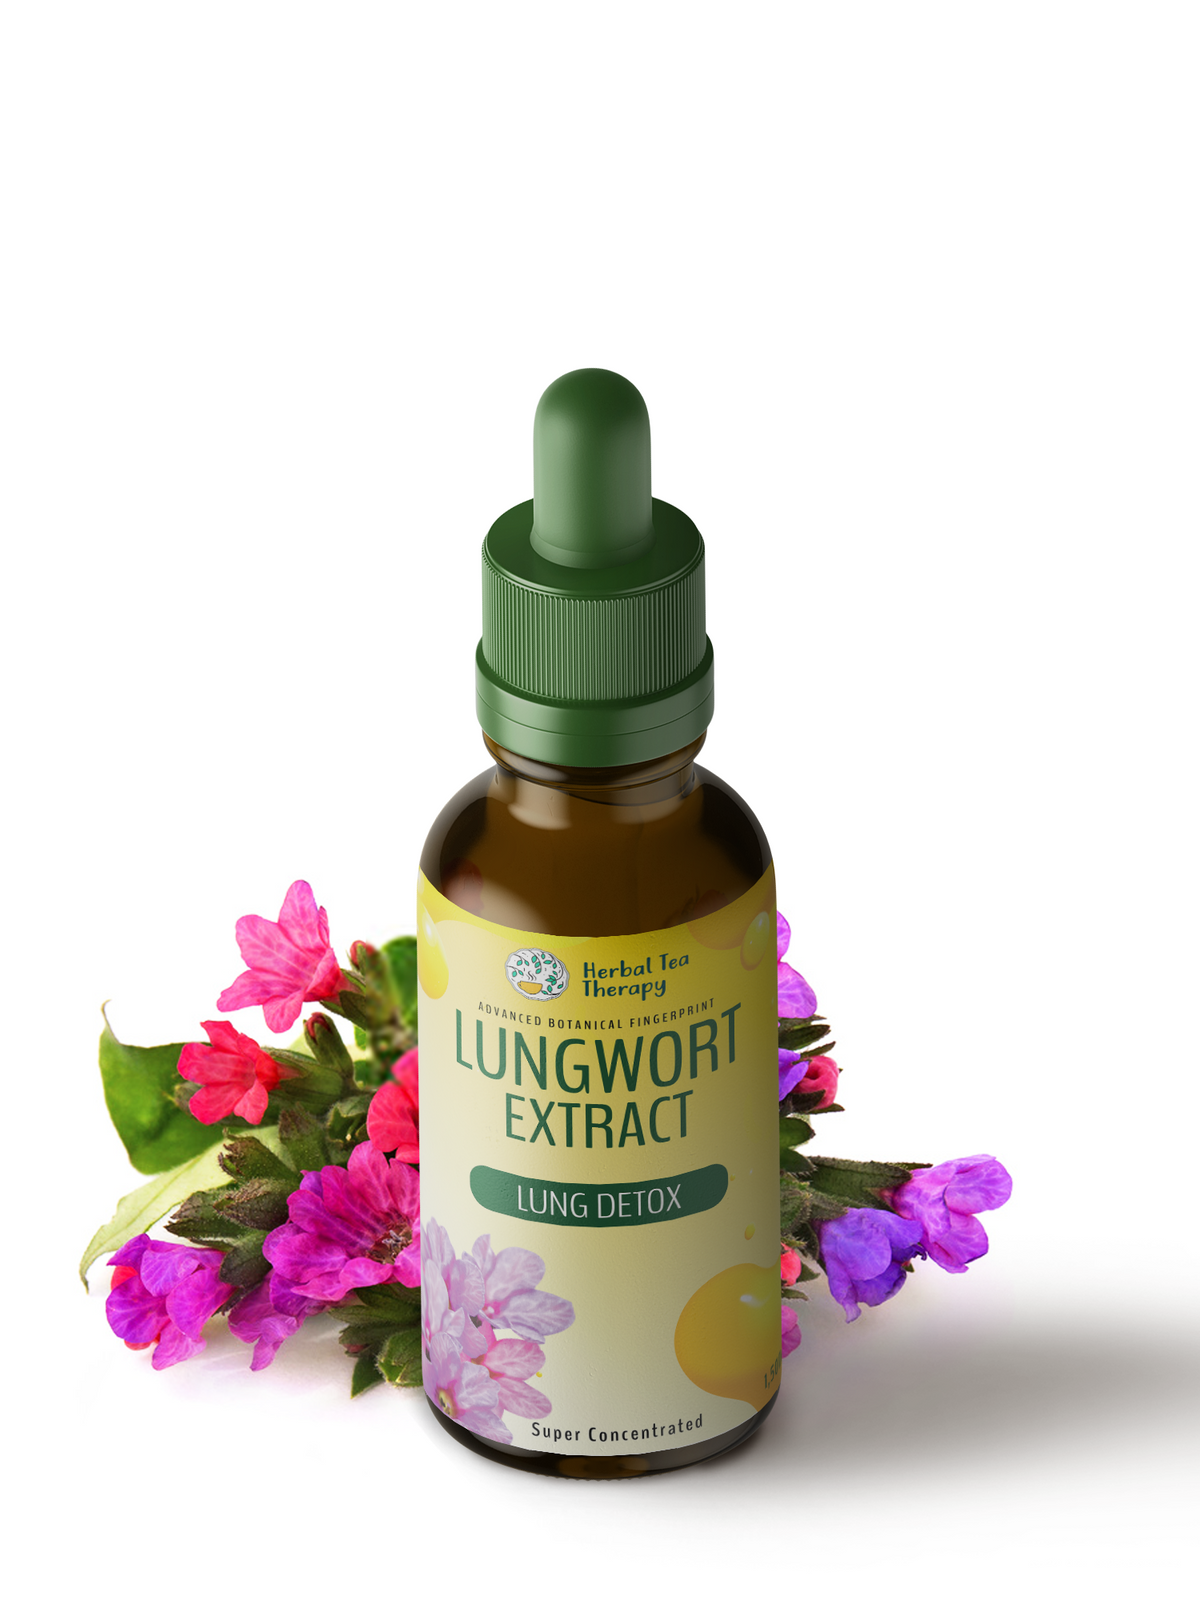 Lungwort Extract